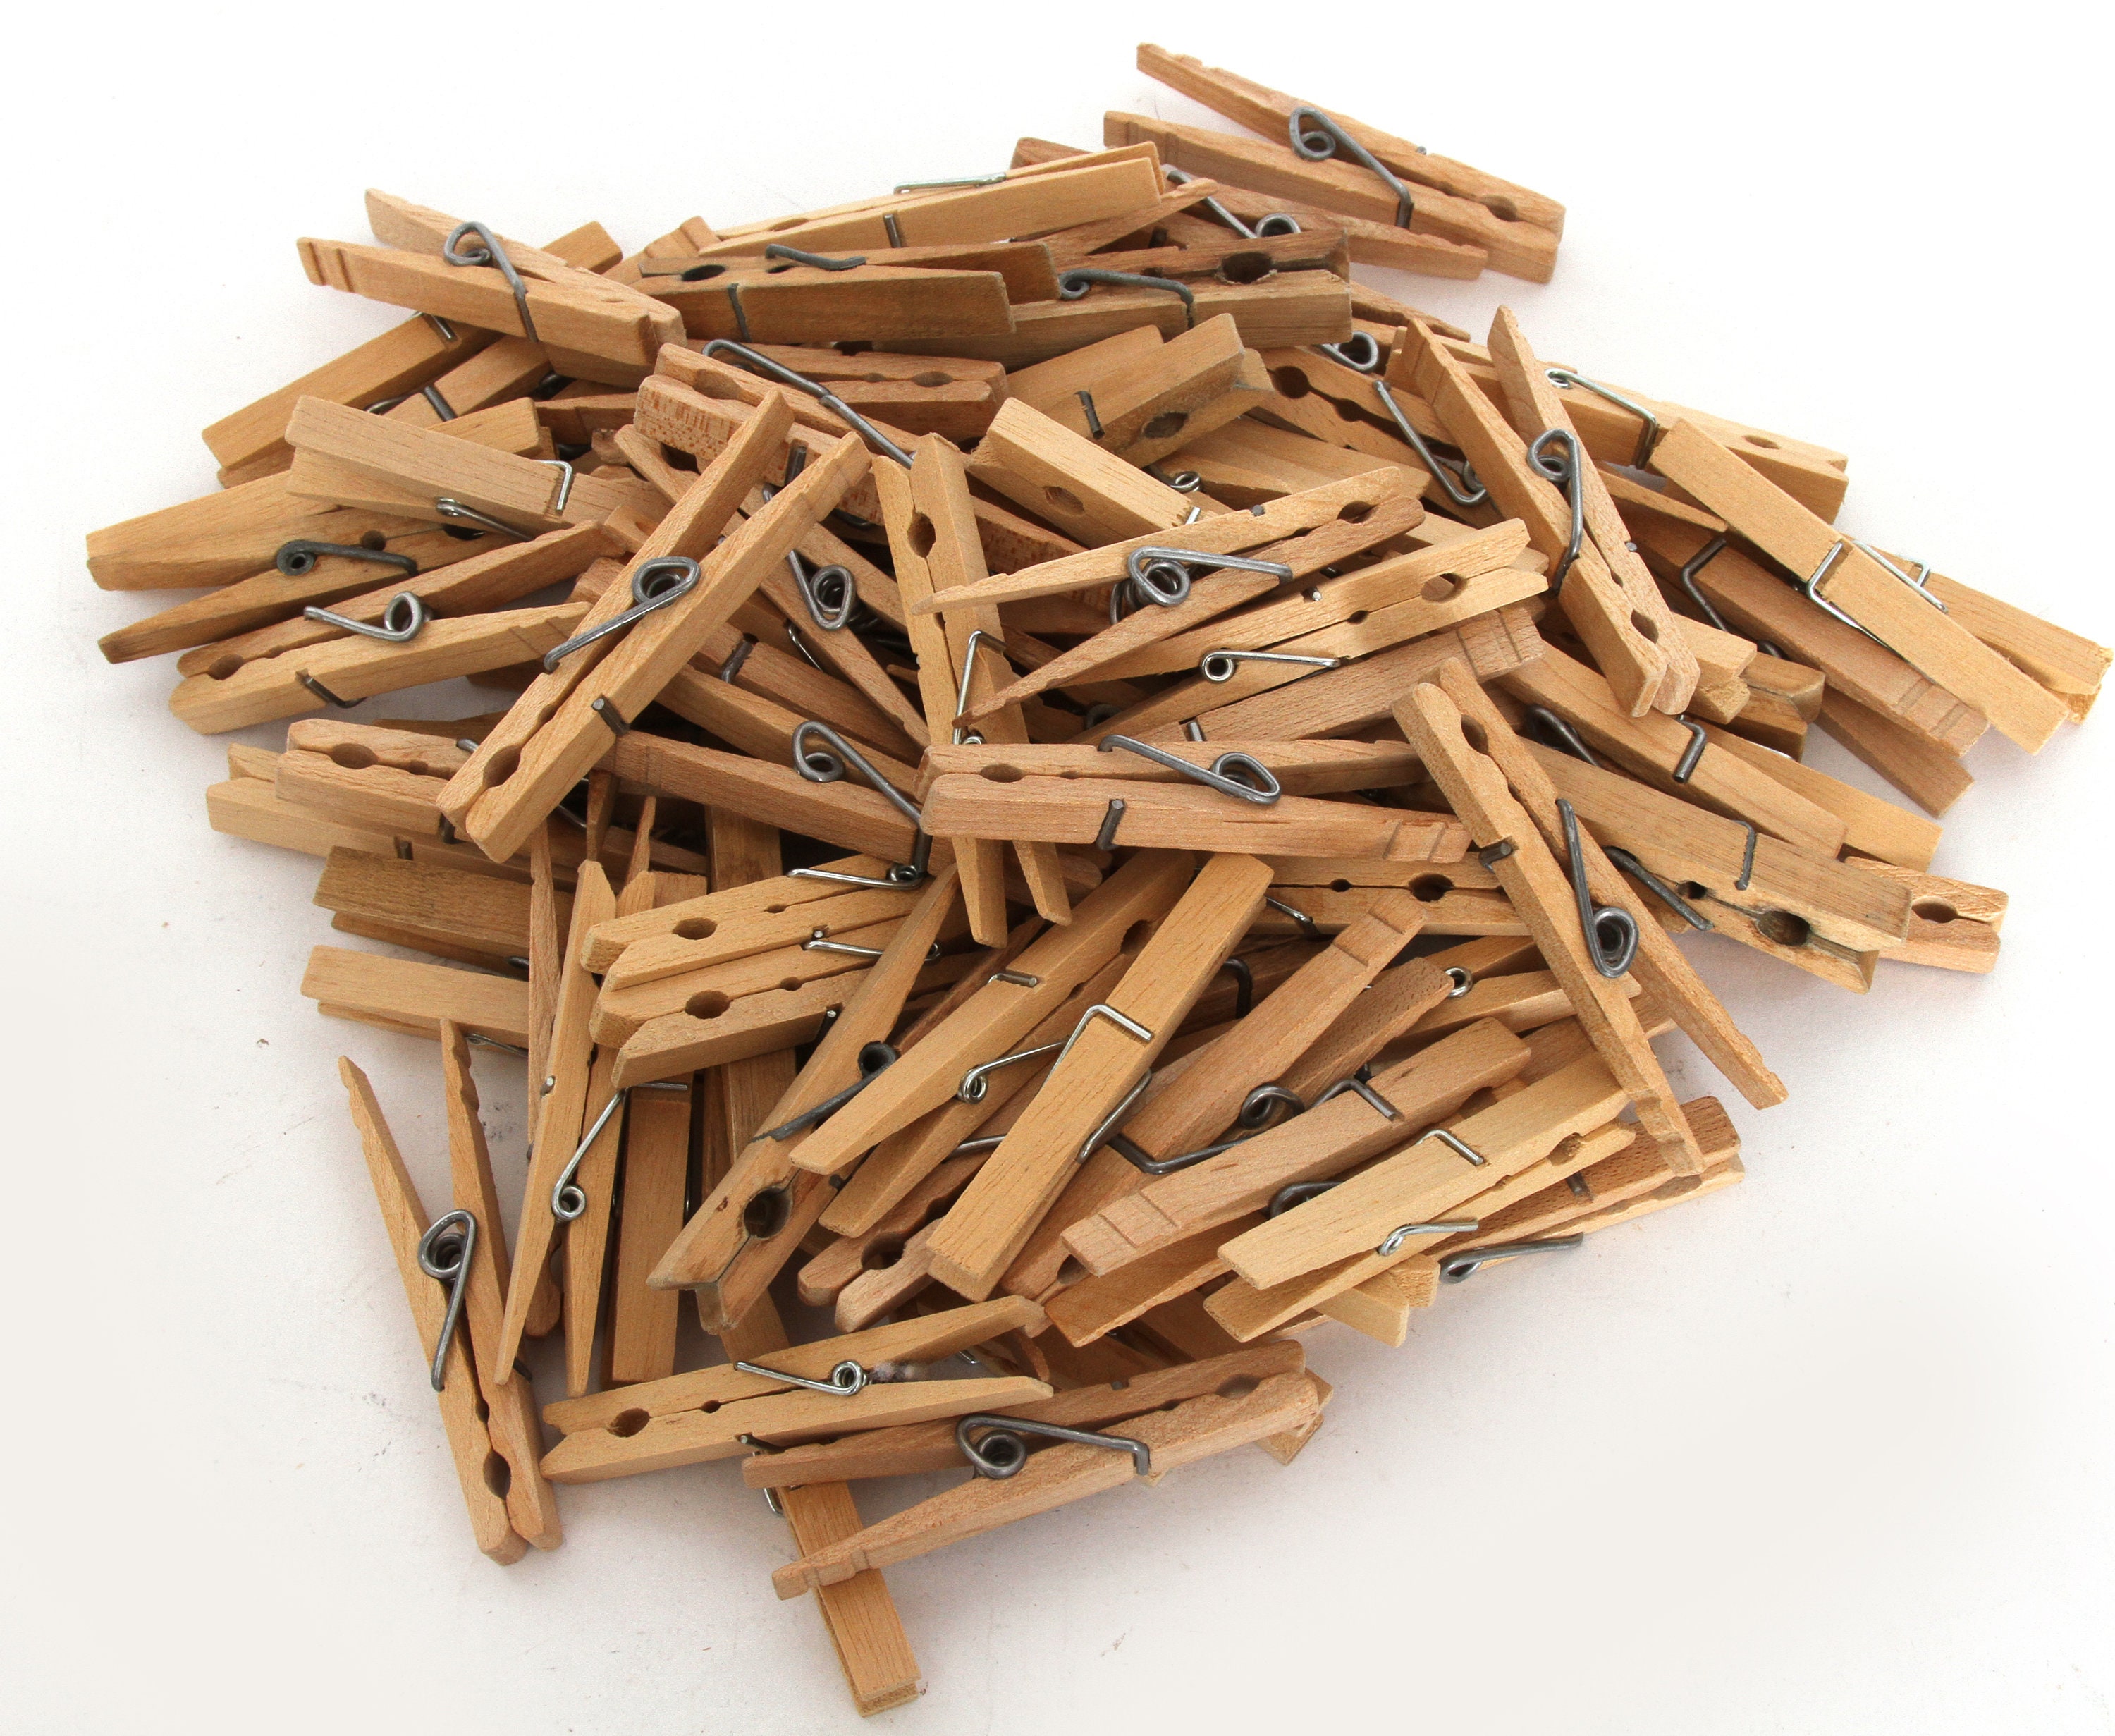 48 Small Wood Clothes Pins 1 3/4 Inch Long 